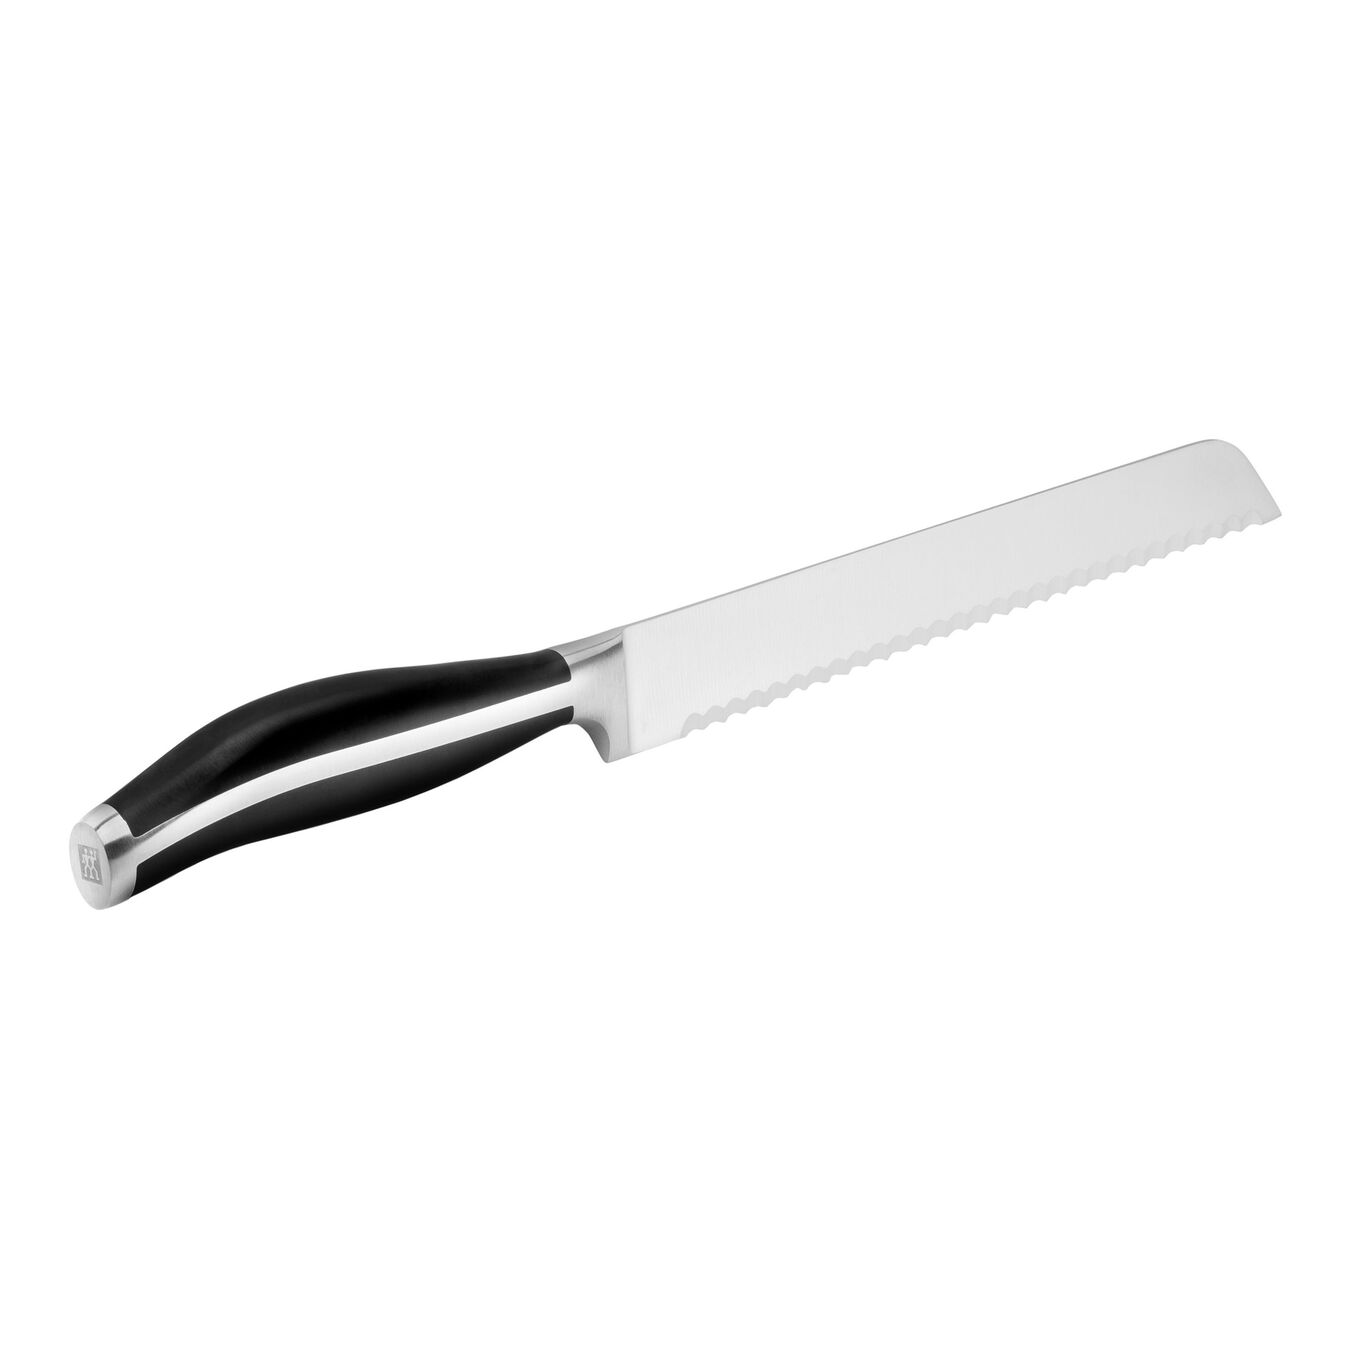 8 inch Bread knife - Visual Imperfections,,large 3